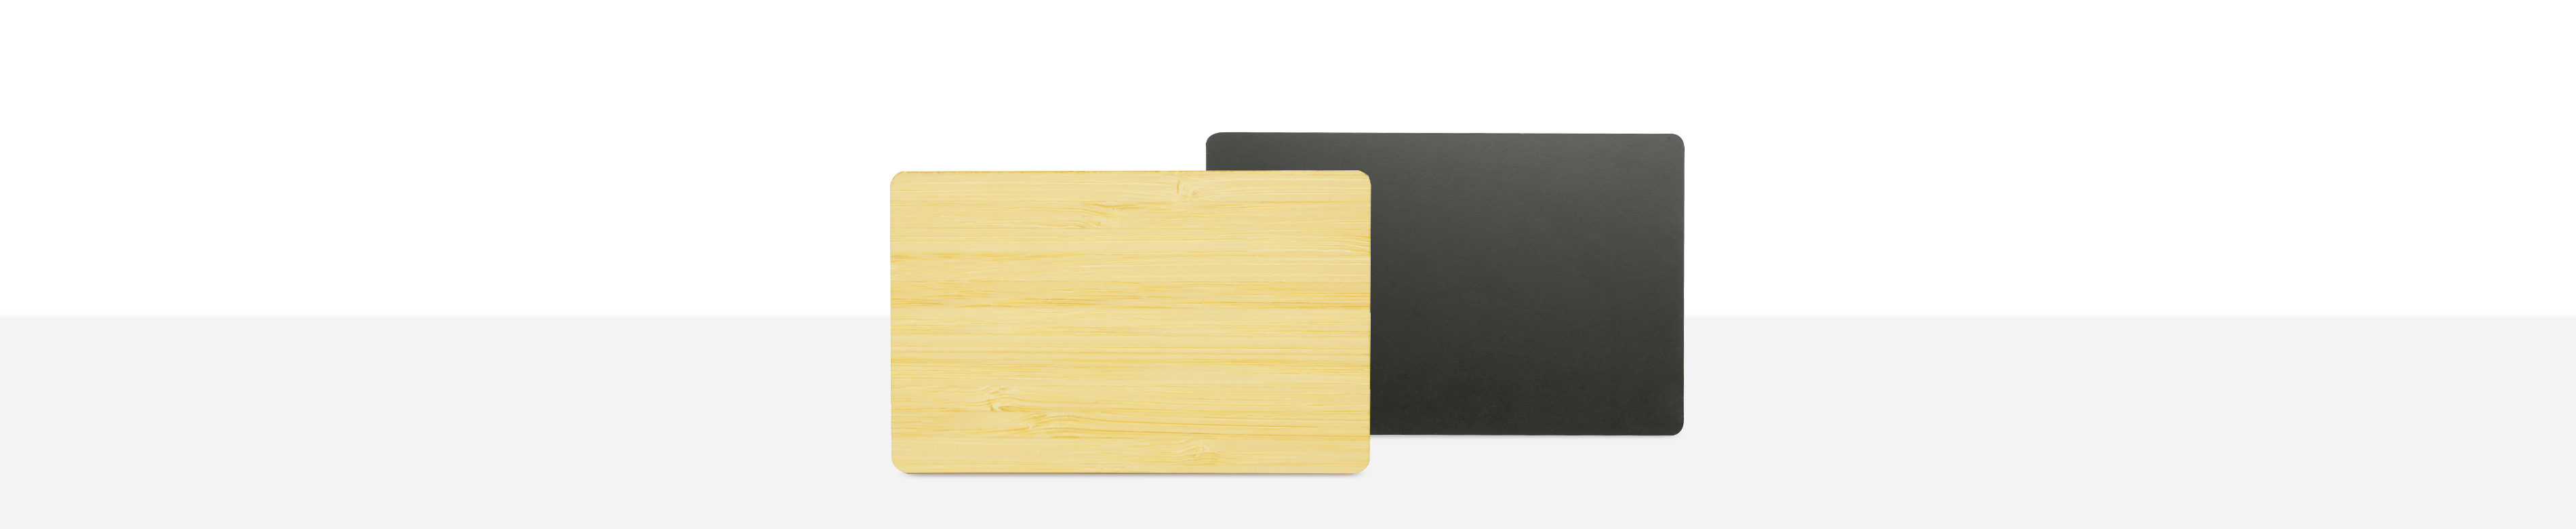 Wooden card next to a black metal card